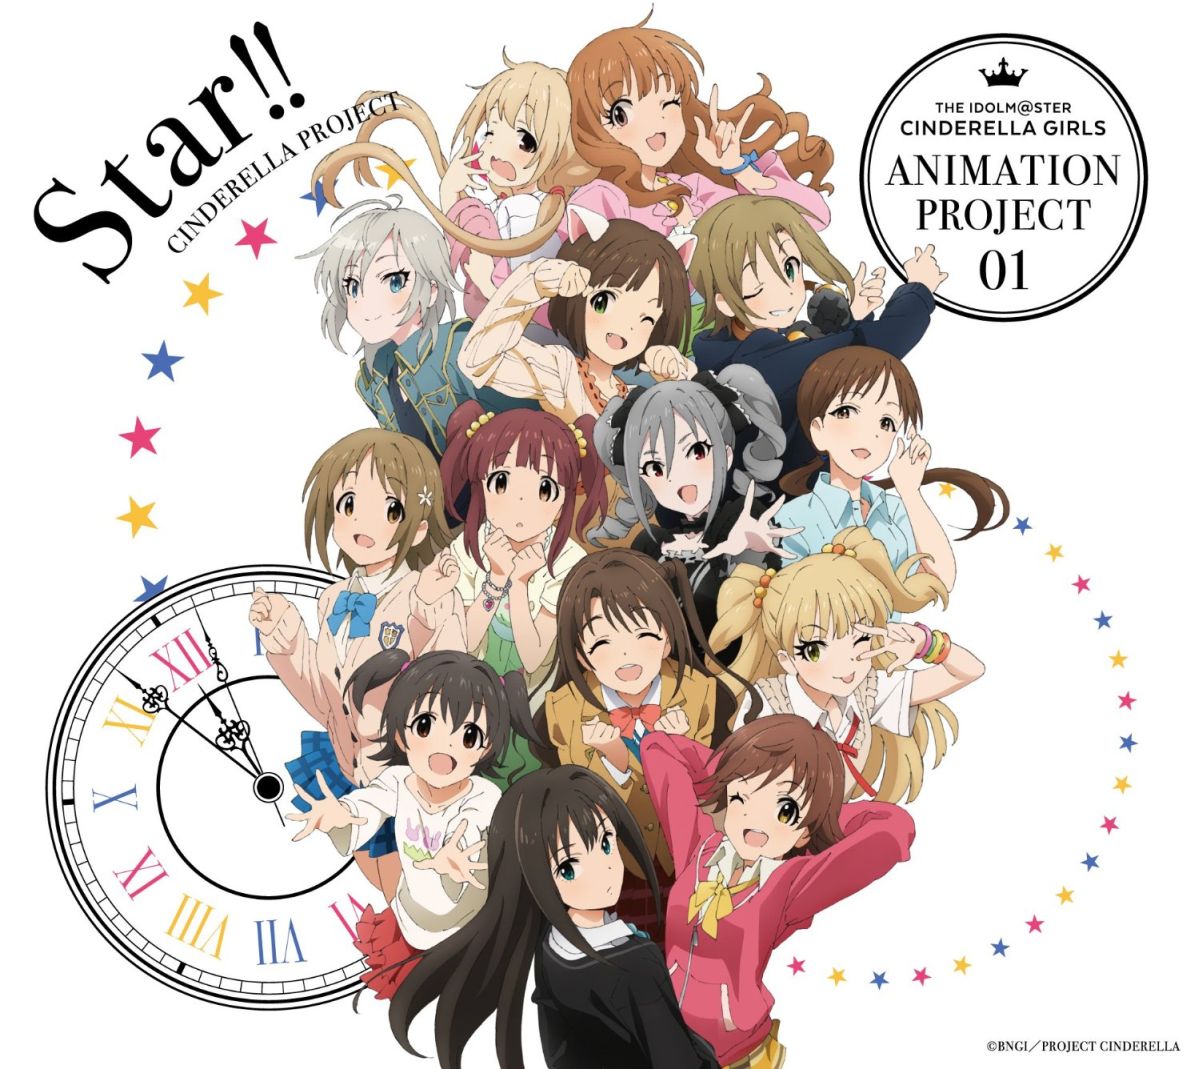 THE IDOLM@STER CINDERELLA GIRLS ANIMATION PROJECT 01 Star!!画像